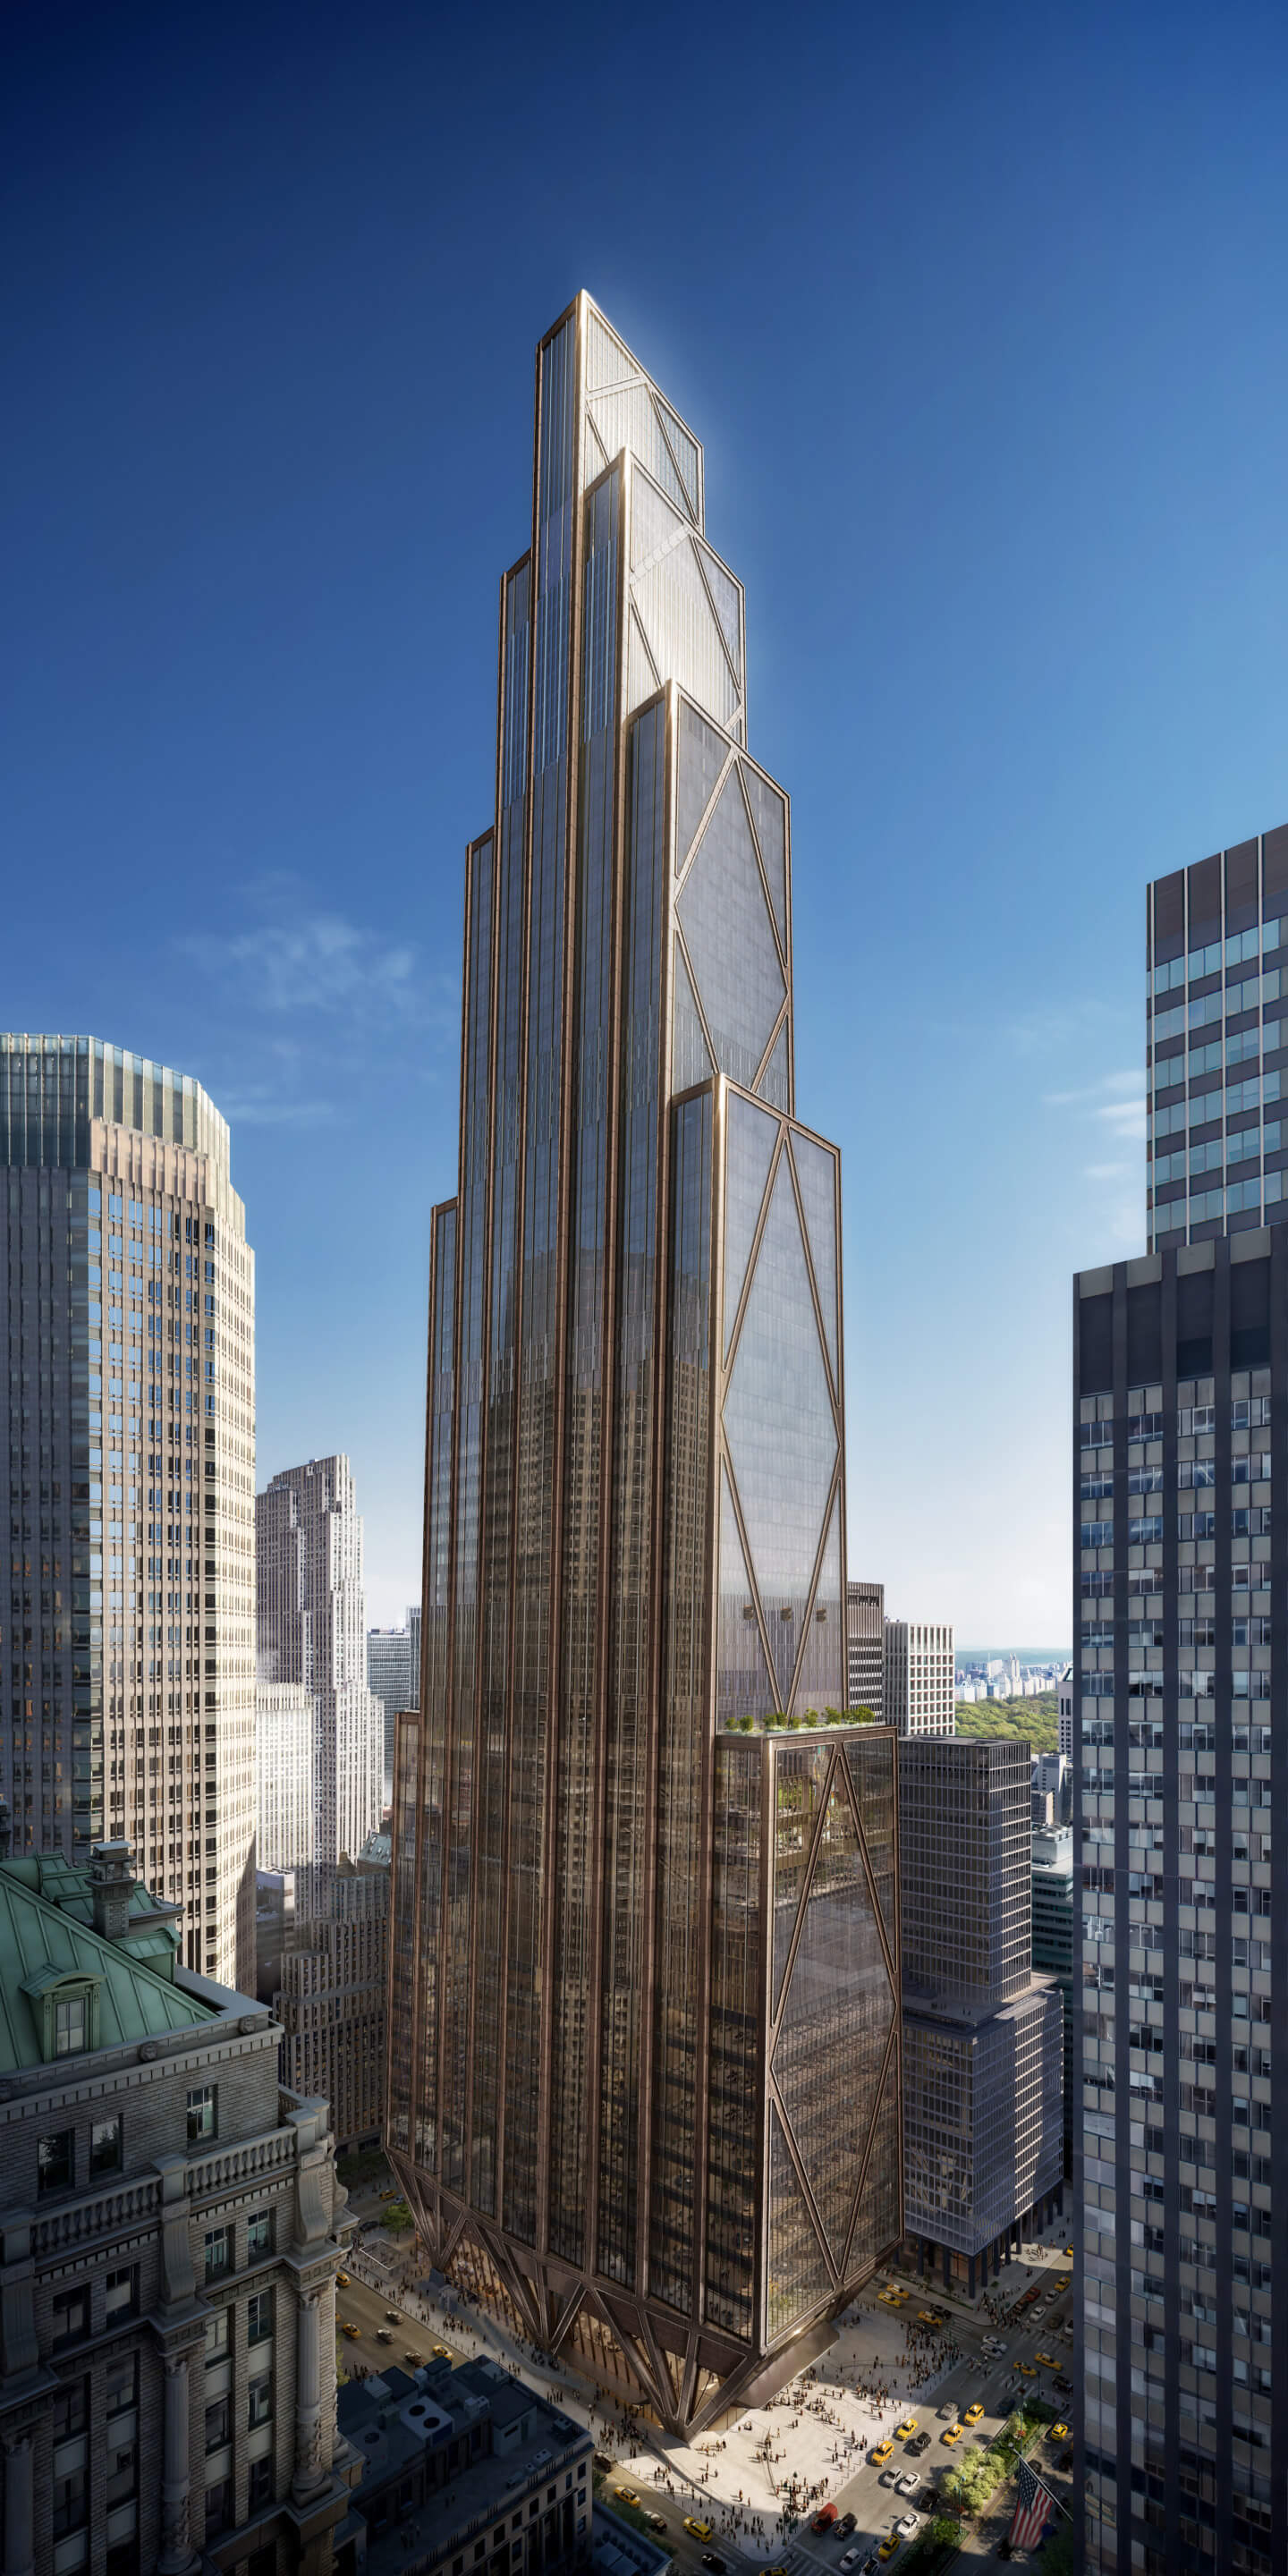 rendering of a glass tower with a diagrid facade